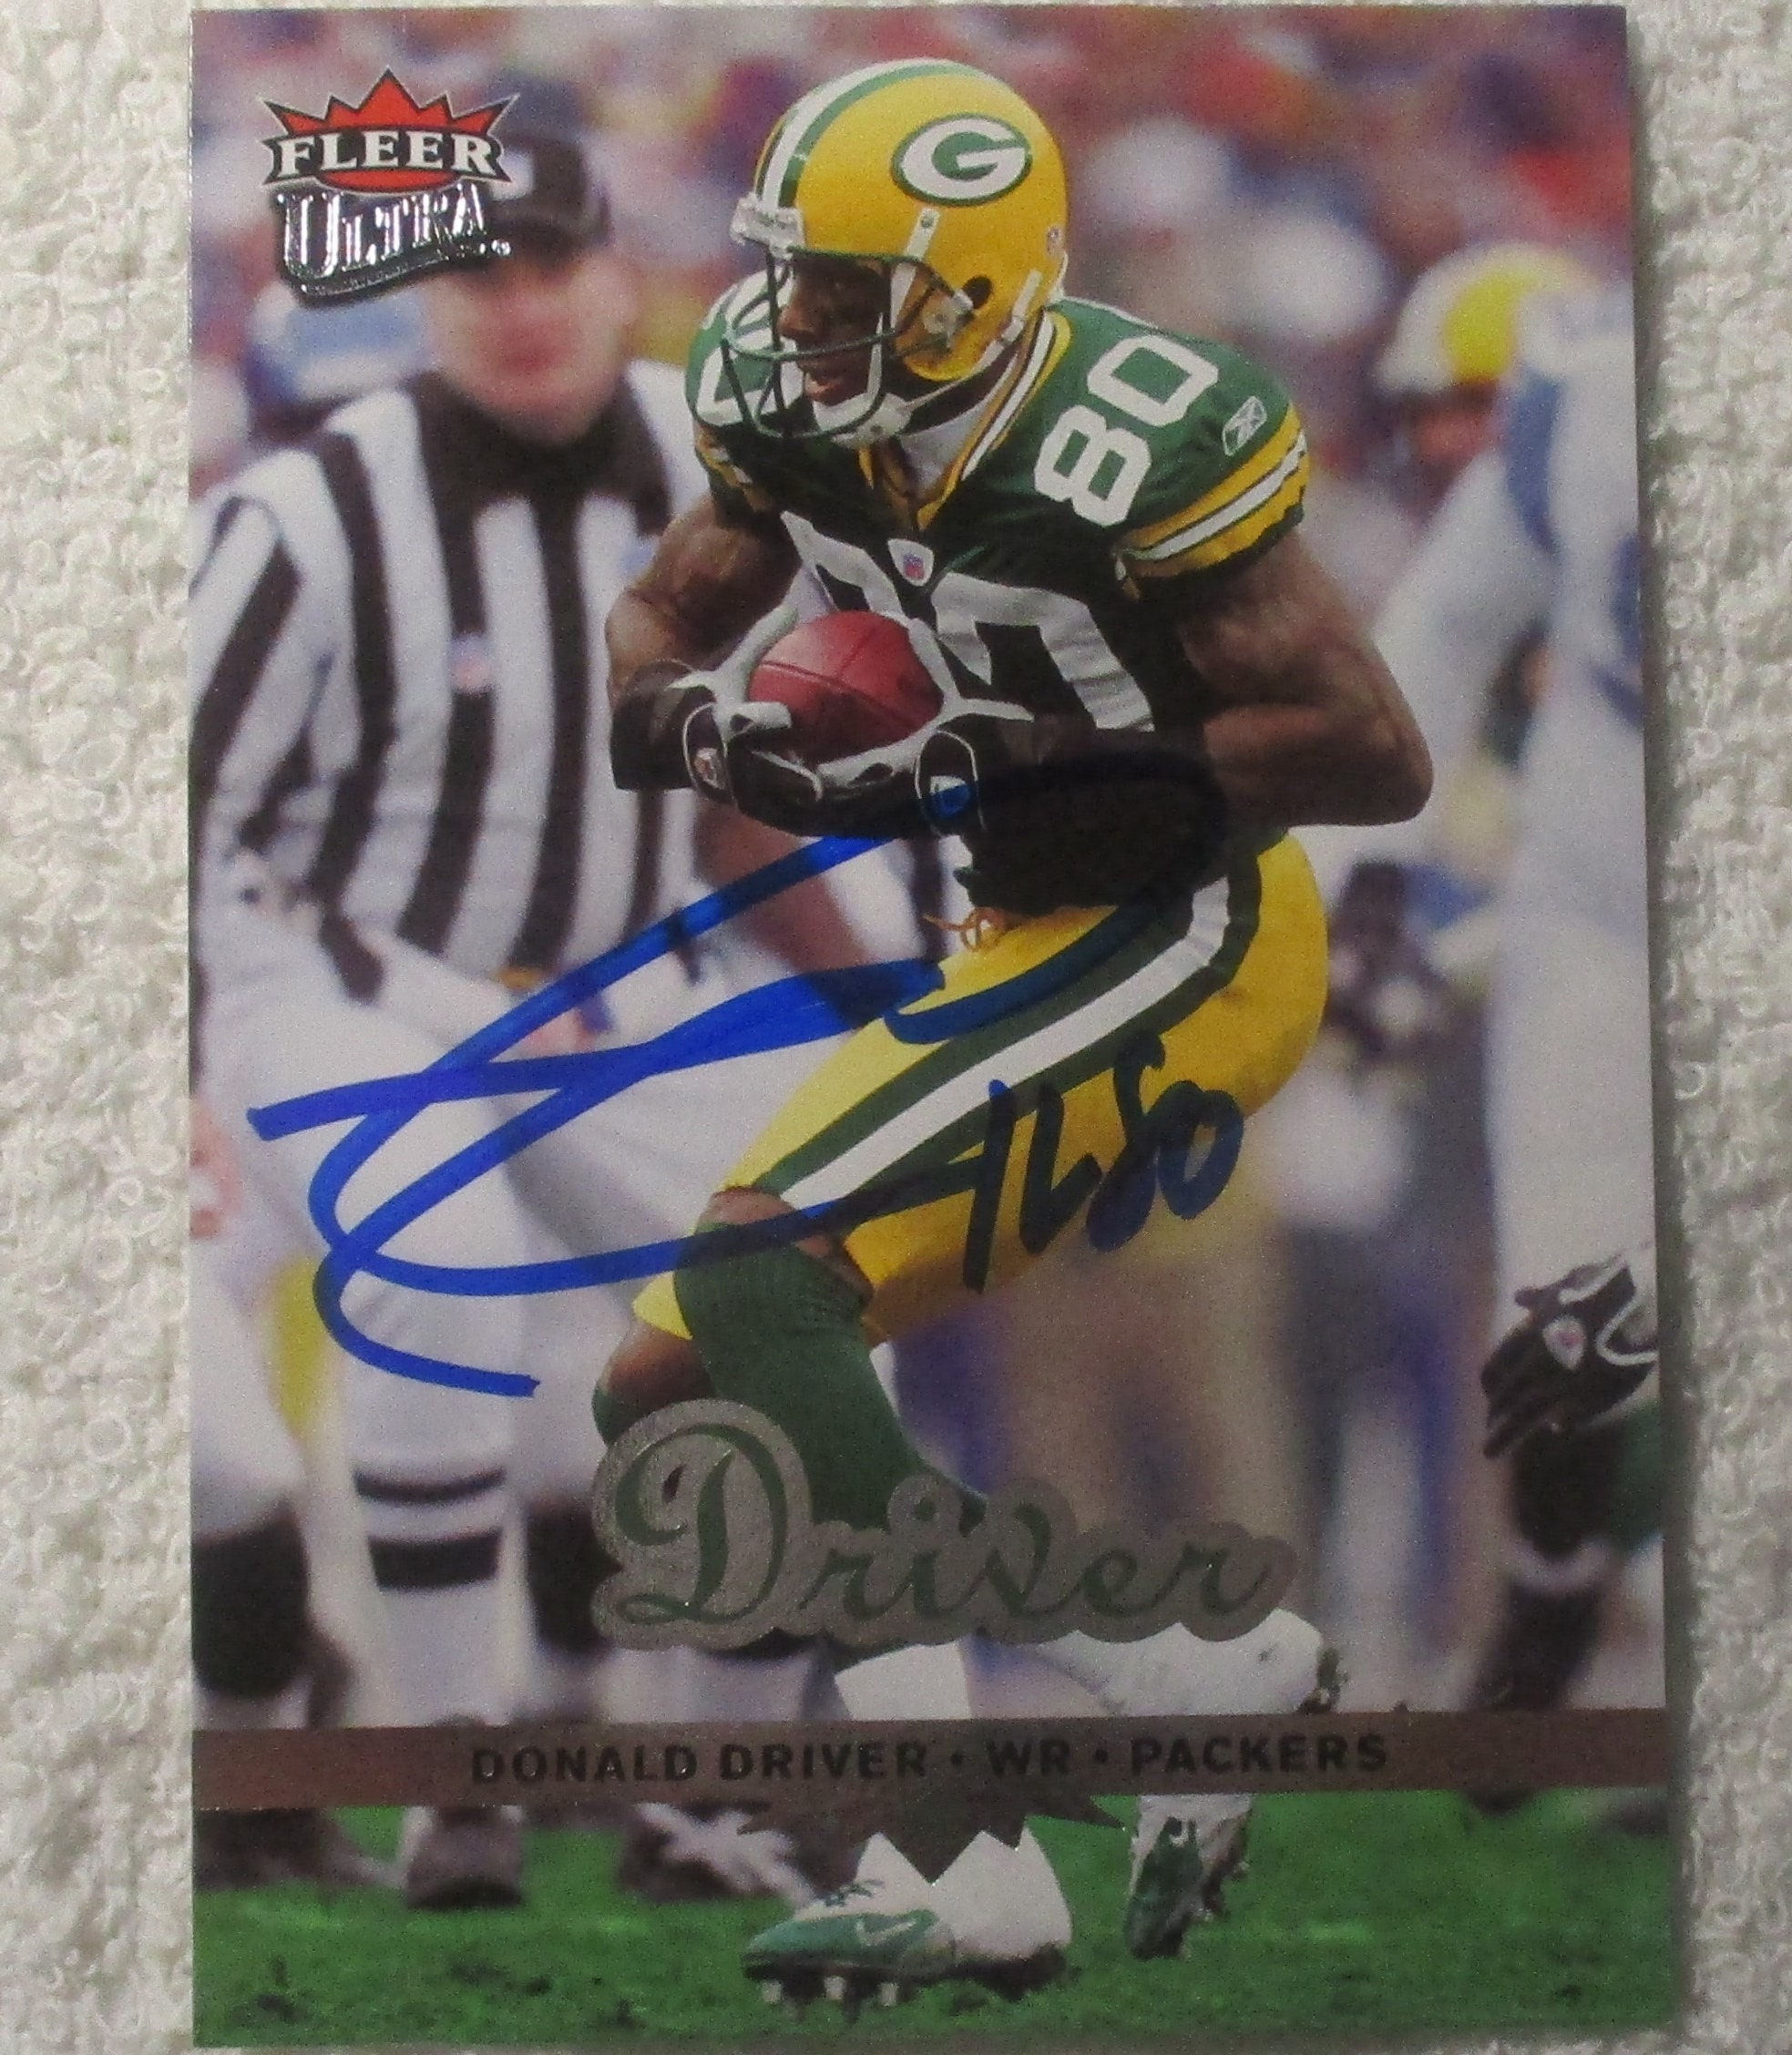 Donald Driver Autographed Card Packers No COA 